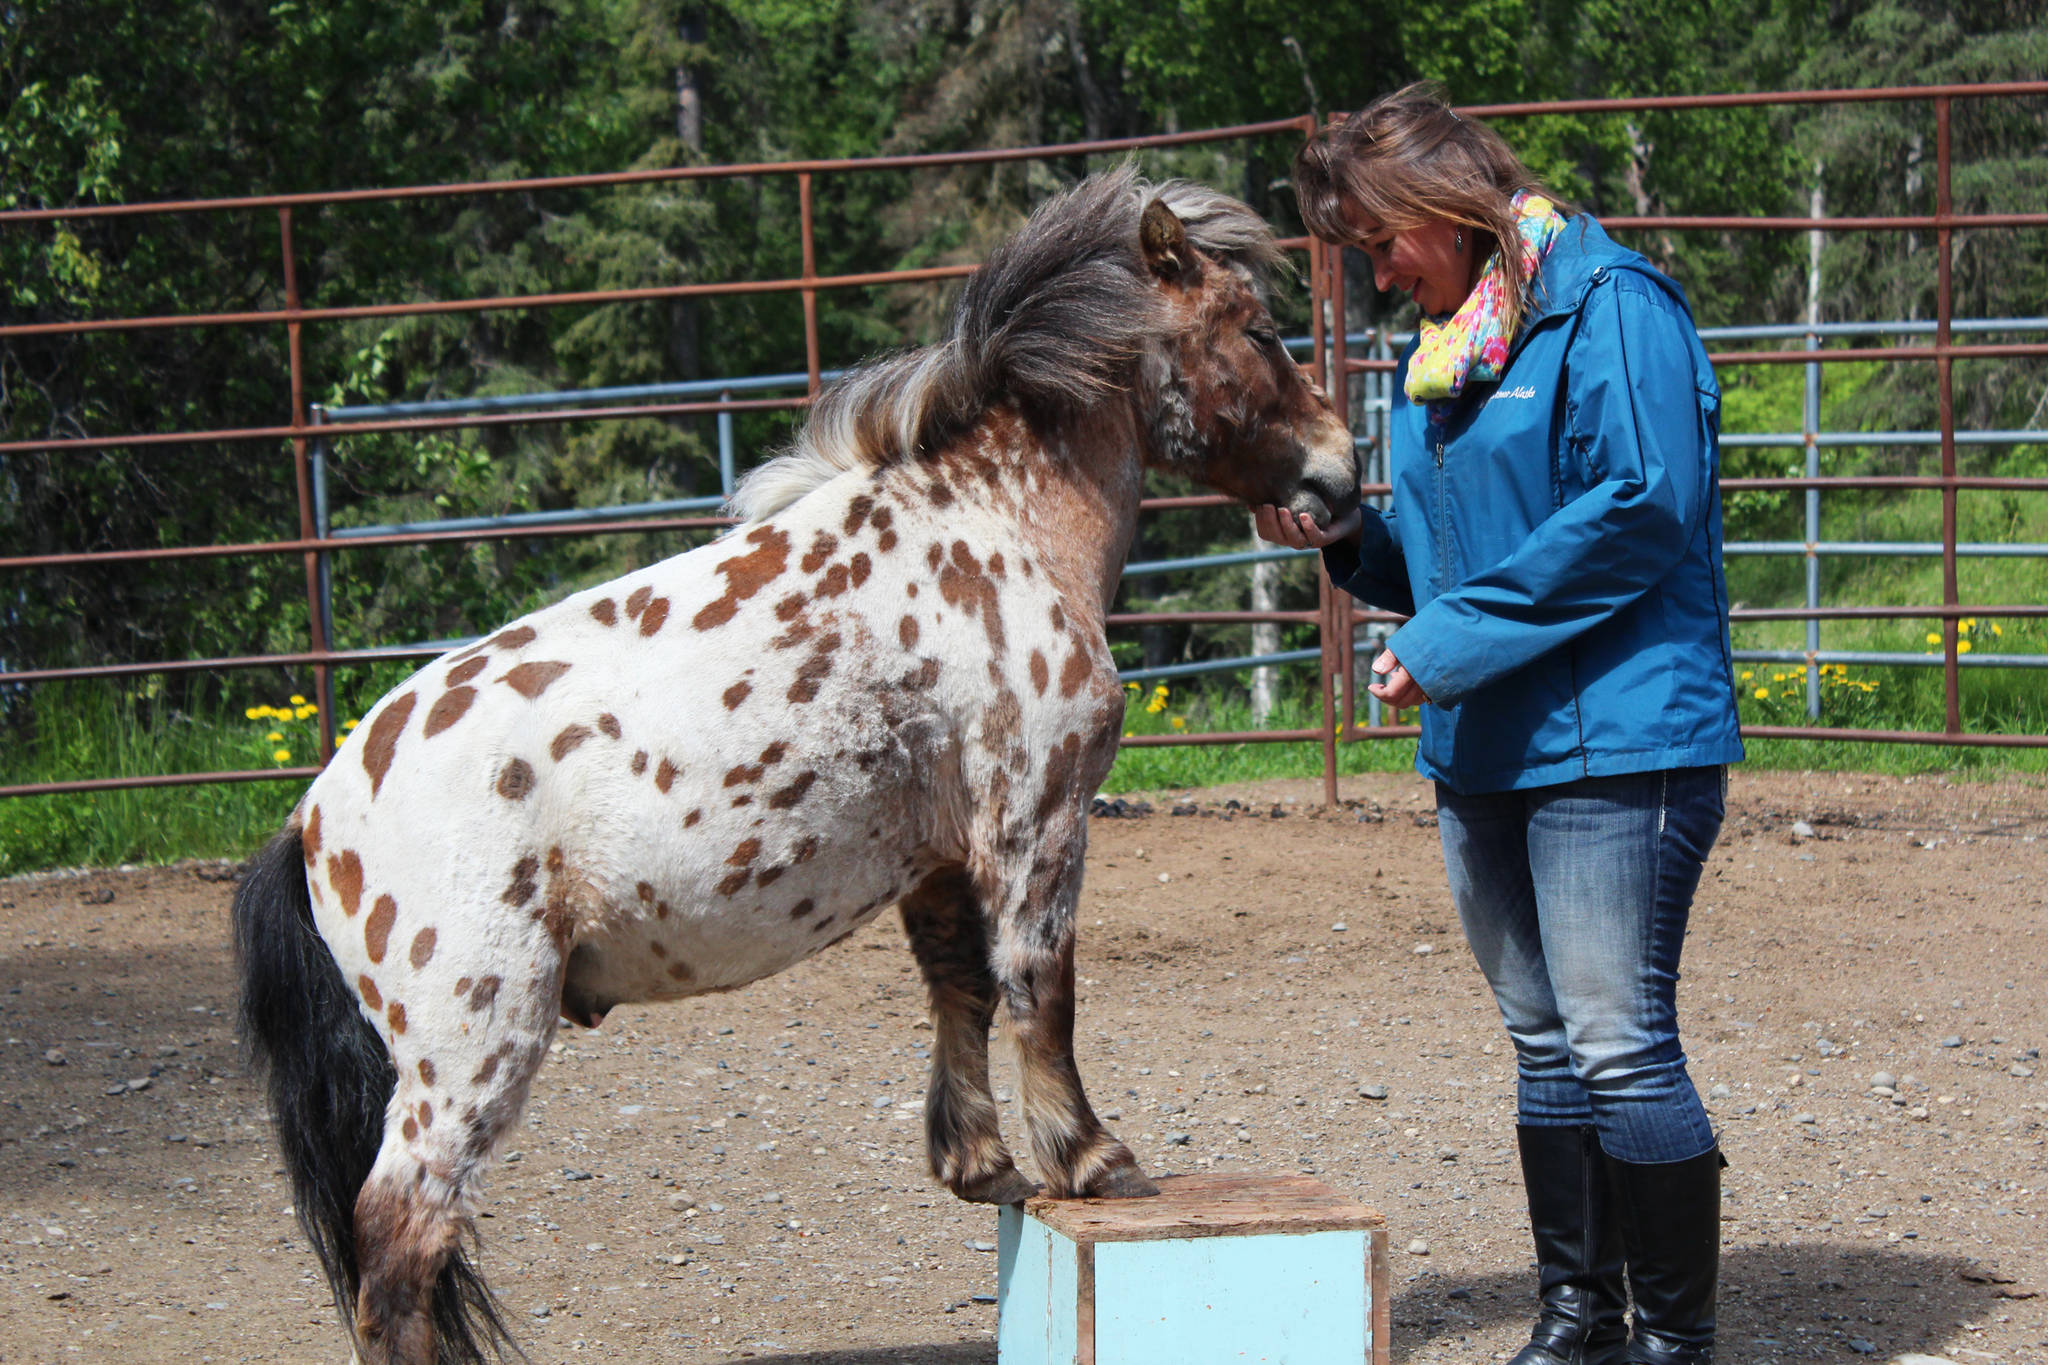 Geri Litzen rewards her miniature horse, Magic, after he performs a trick at her home Wednesday, June 14, 2017 in Nikiski, Alaska. Litzen recently started a business called Milestones Equine Therapy, in which she offers sessions and activities with her five horses to promote wellness through human-animal connection. (Megan Pacer/Peninsula Clarion)